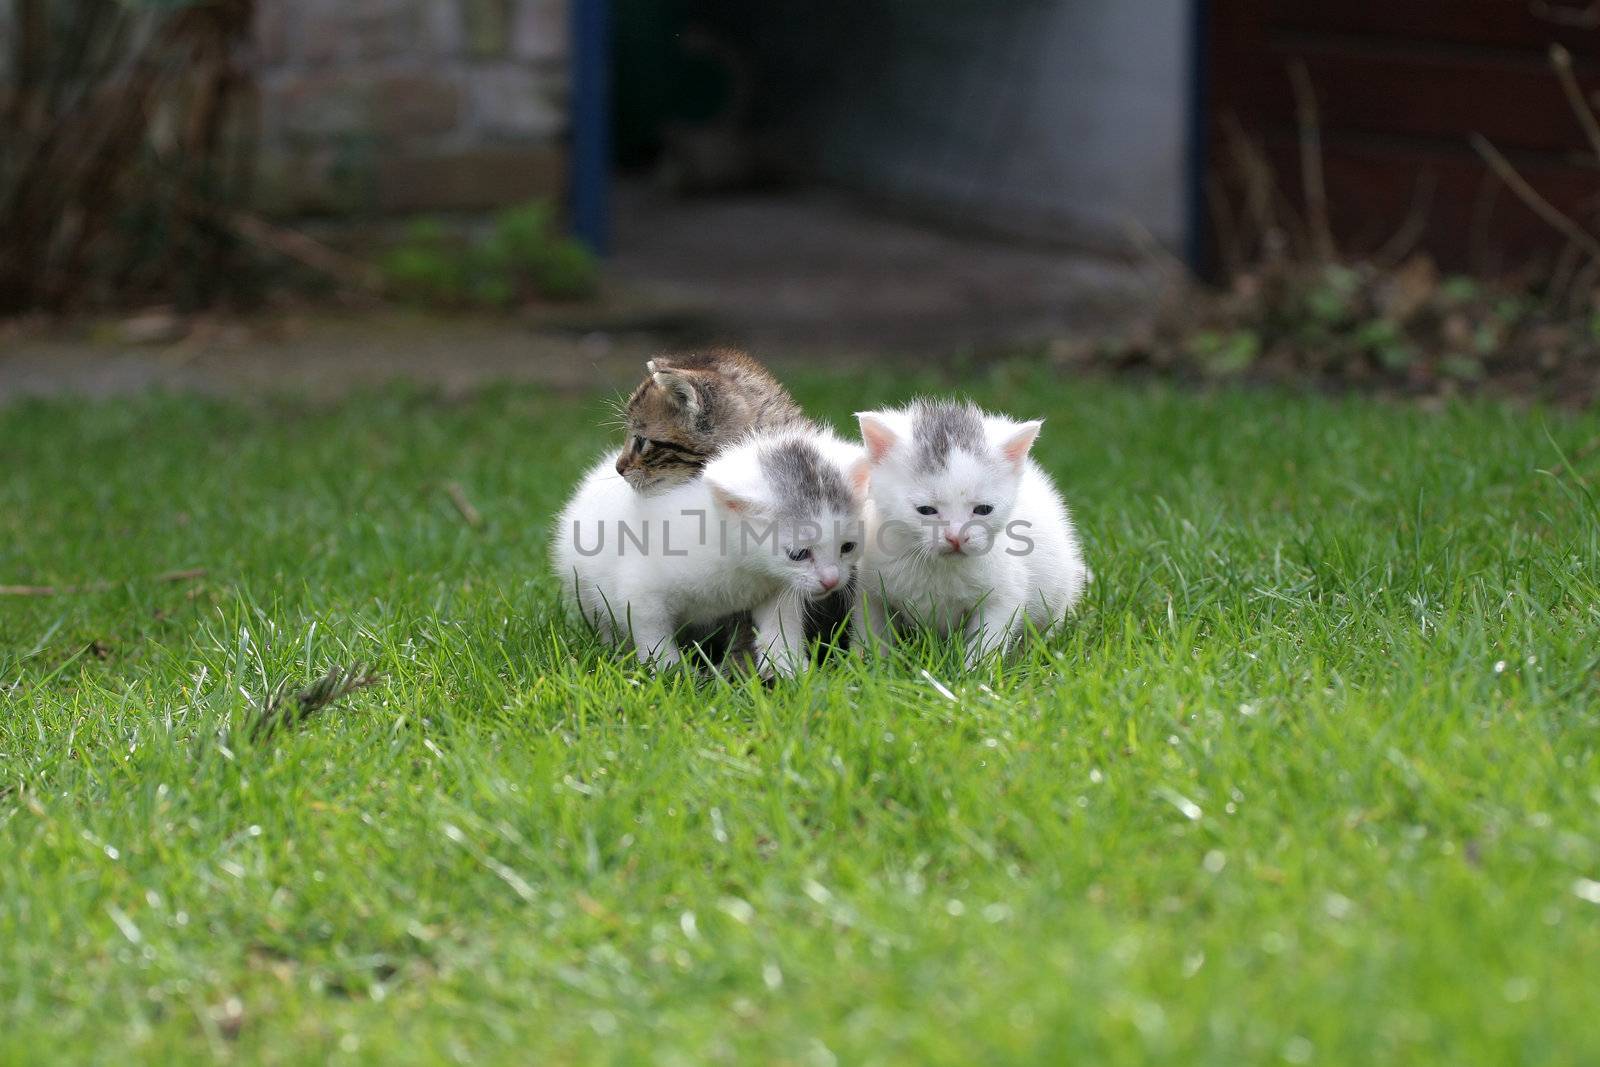 Three little kittens staying close together on the enormous lawn